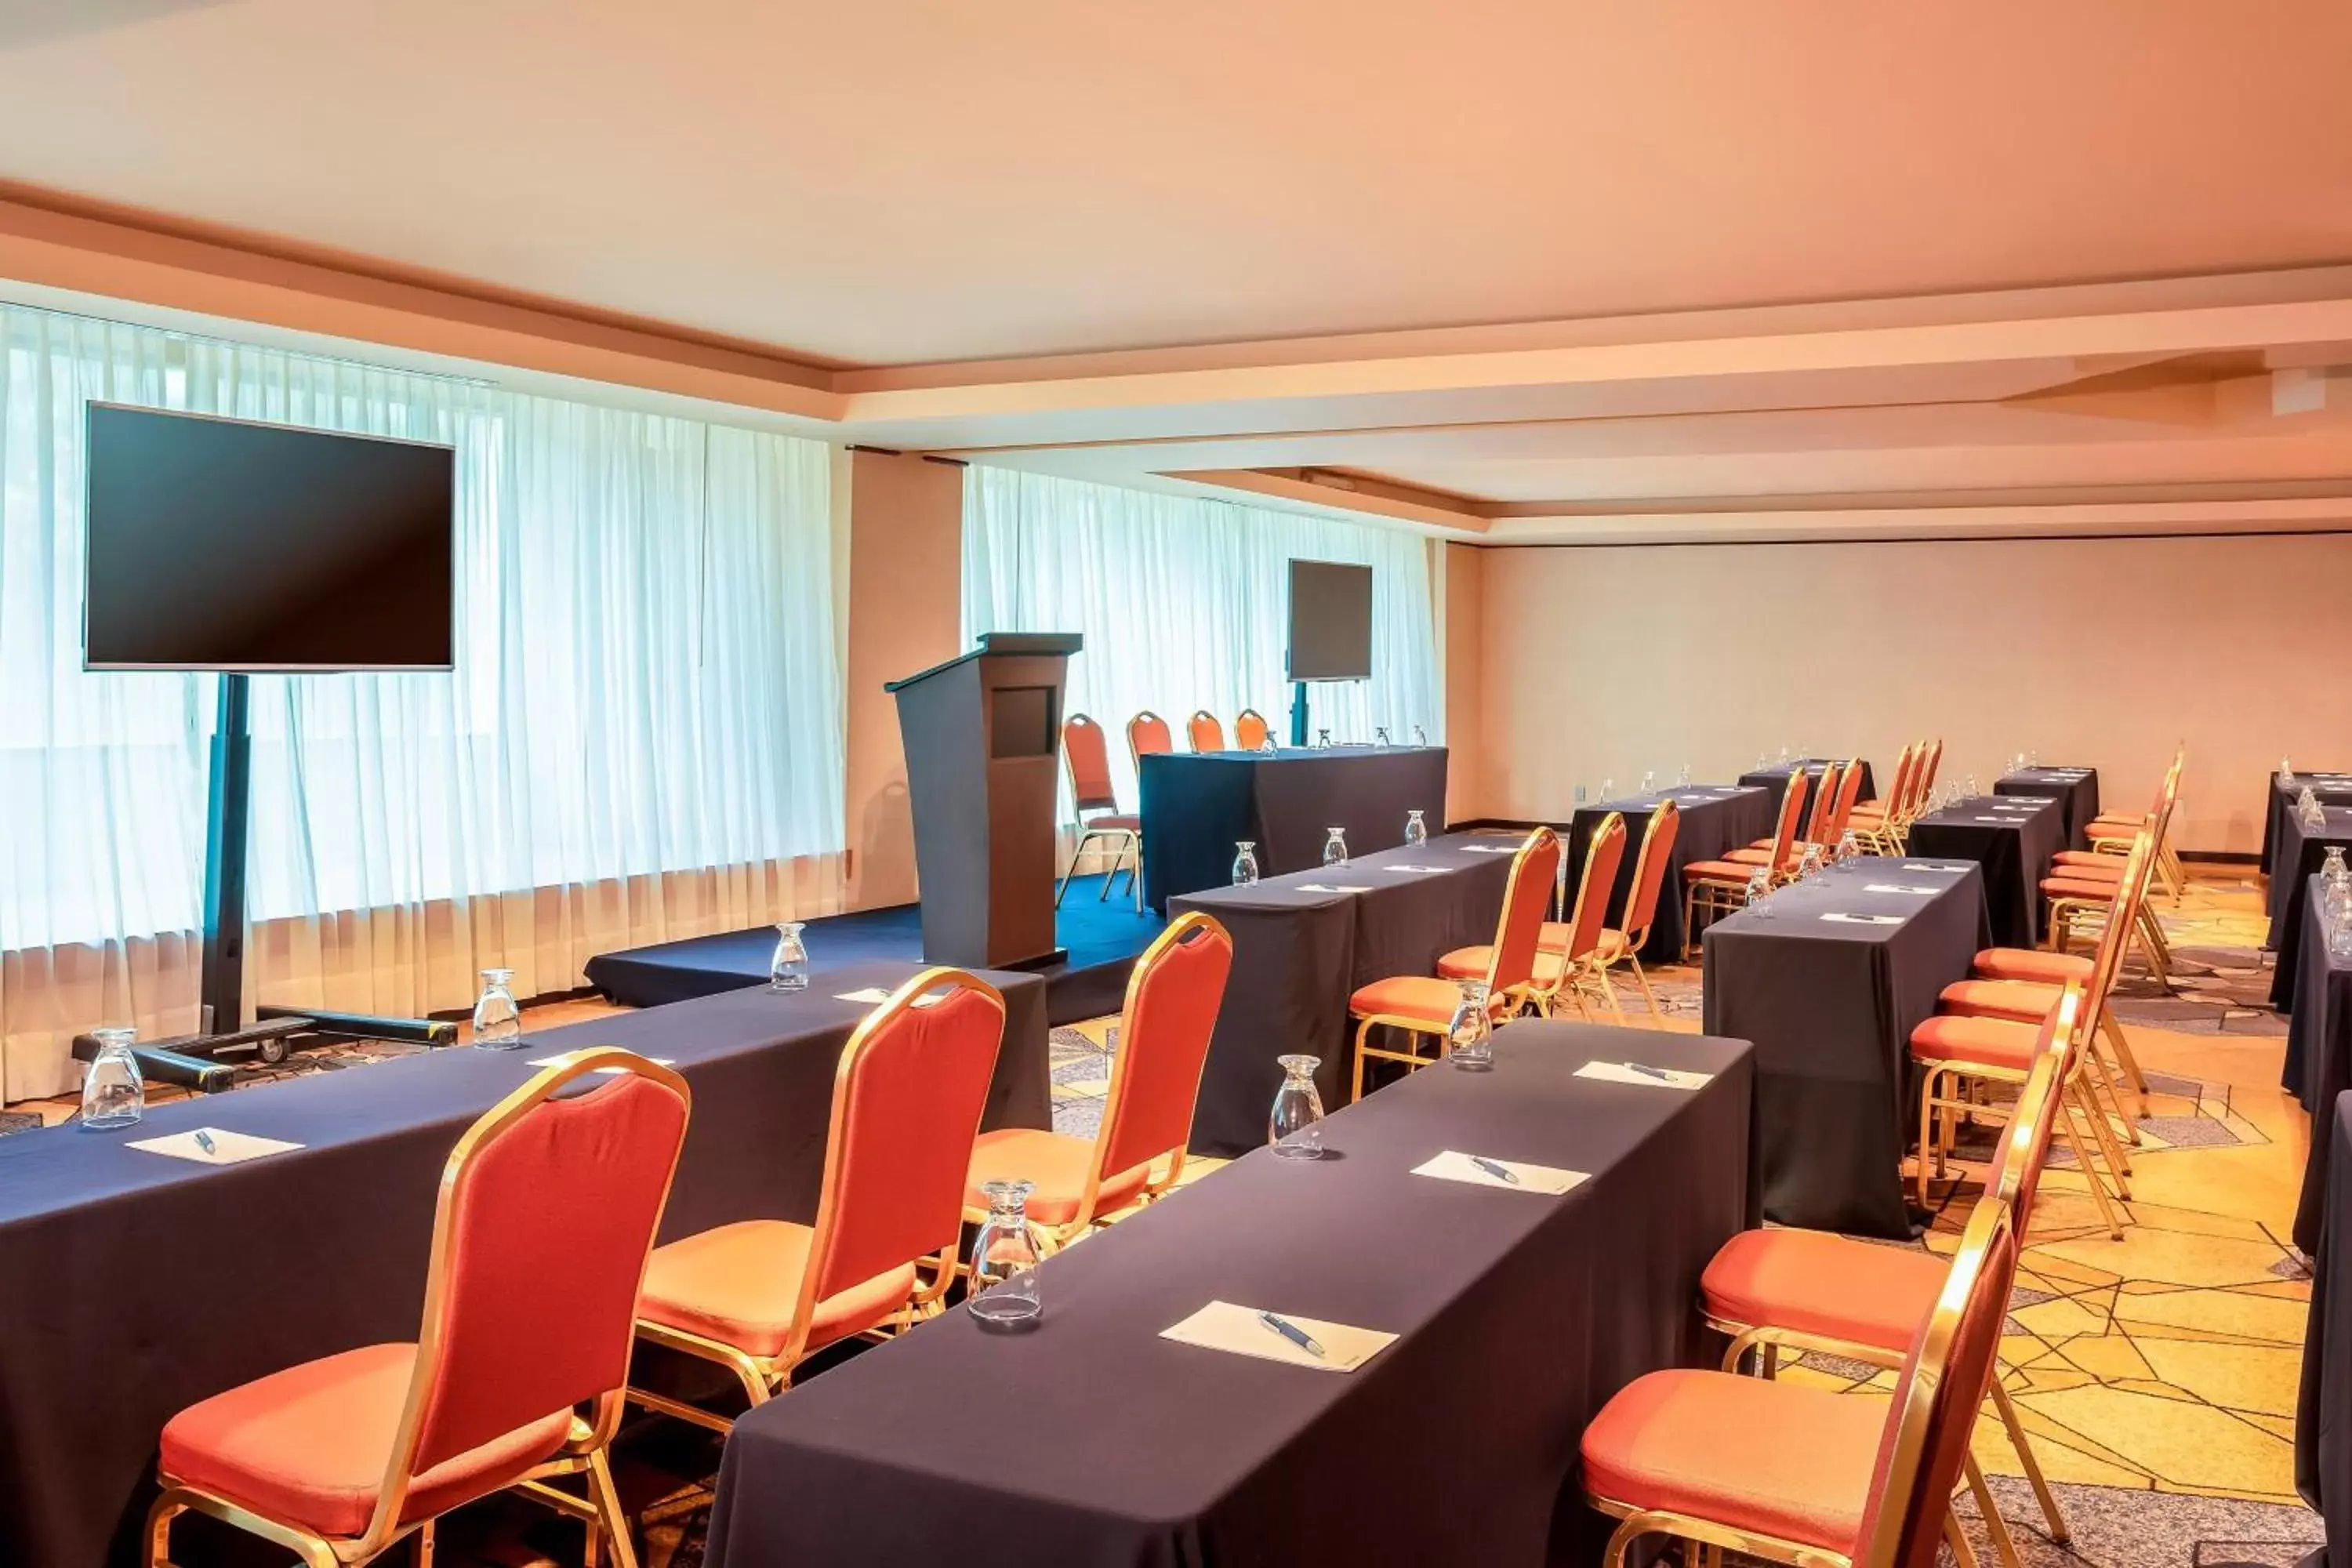 Meeting/conference room in Sheraton Mexico City Maria Isabel